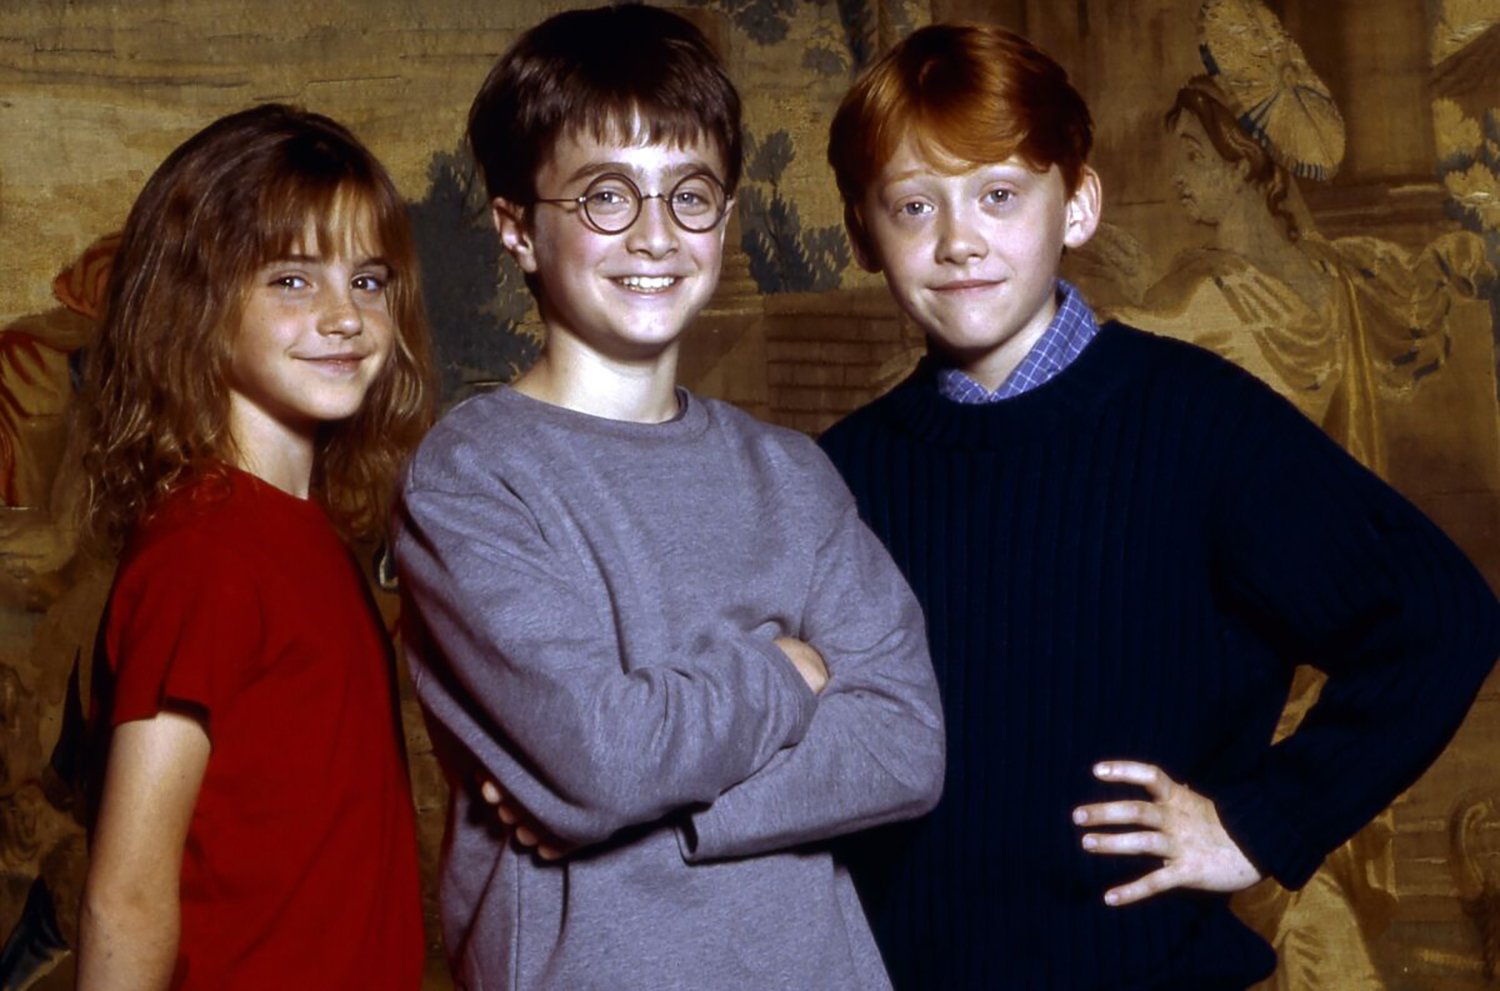 ‘Harry Potter’ Movies Are Back on HBO Max Just in Time for the Holidays